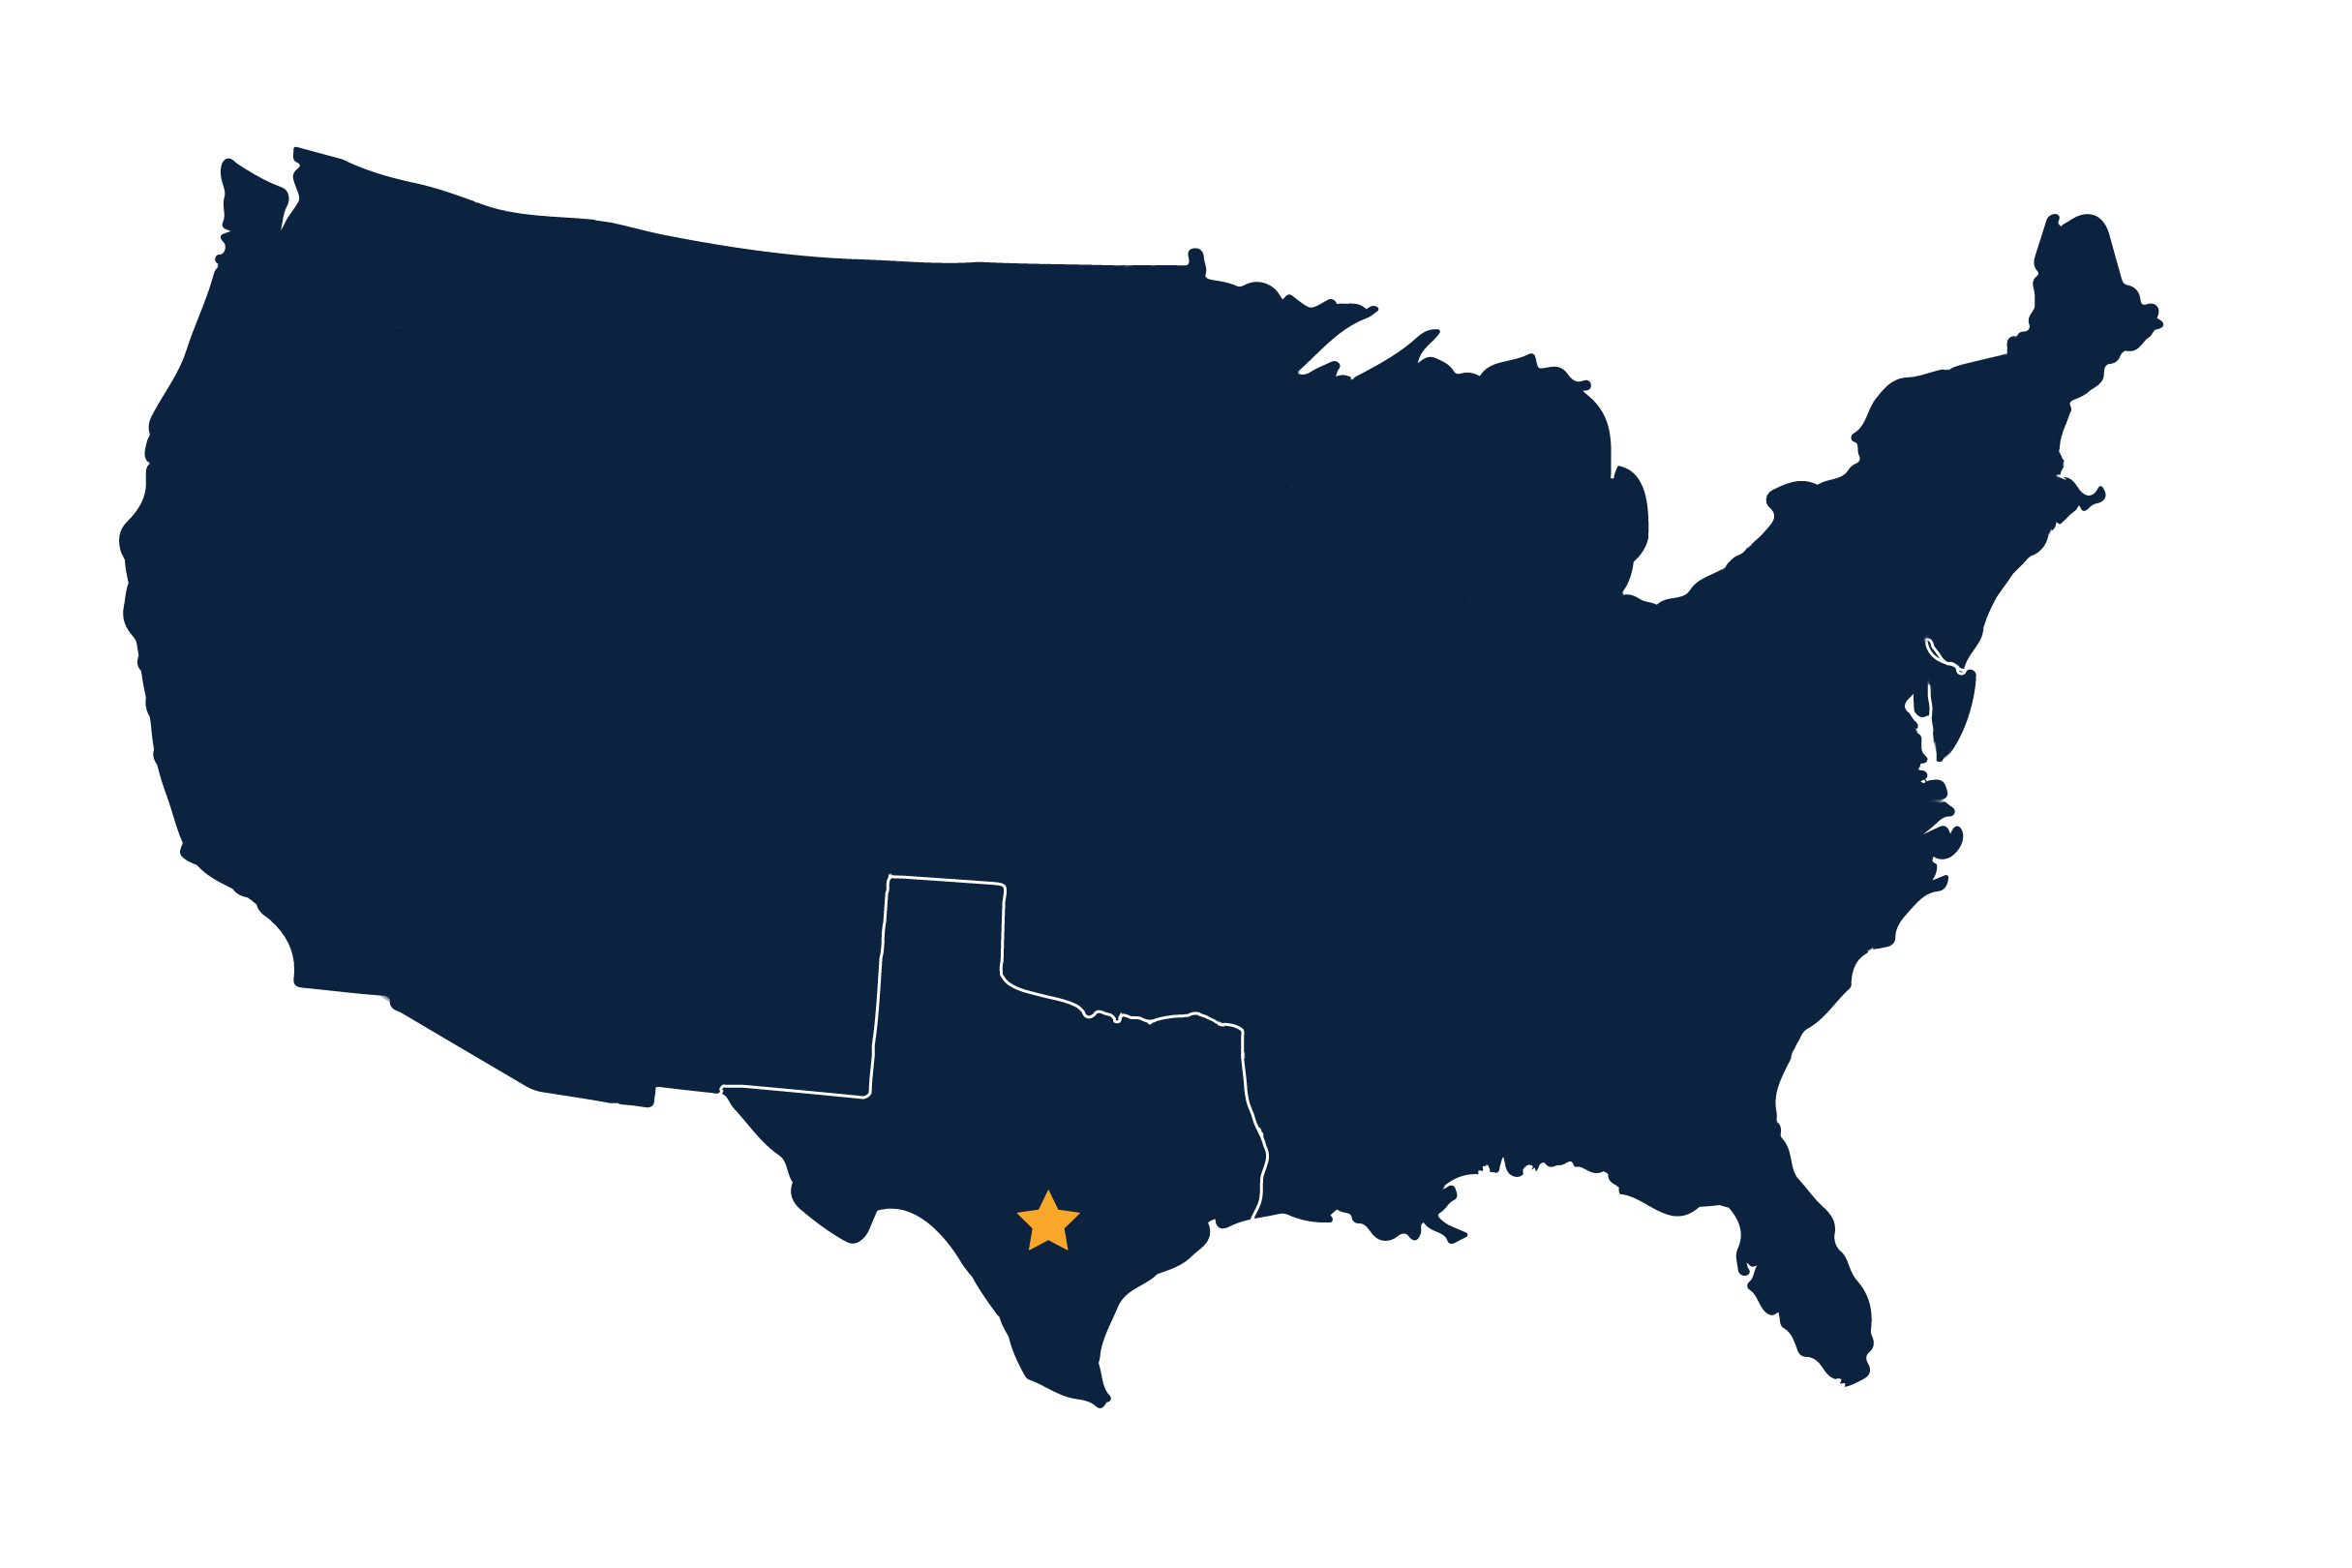 Map of the continental USA with San Antonio marked with a star